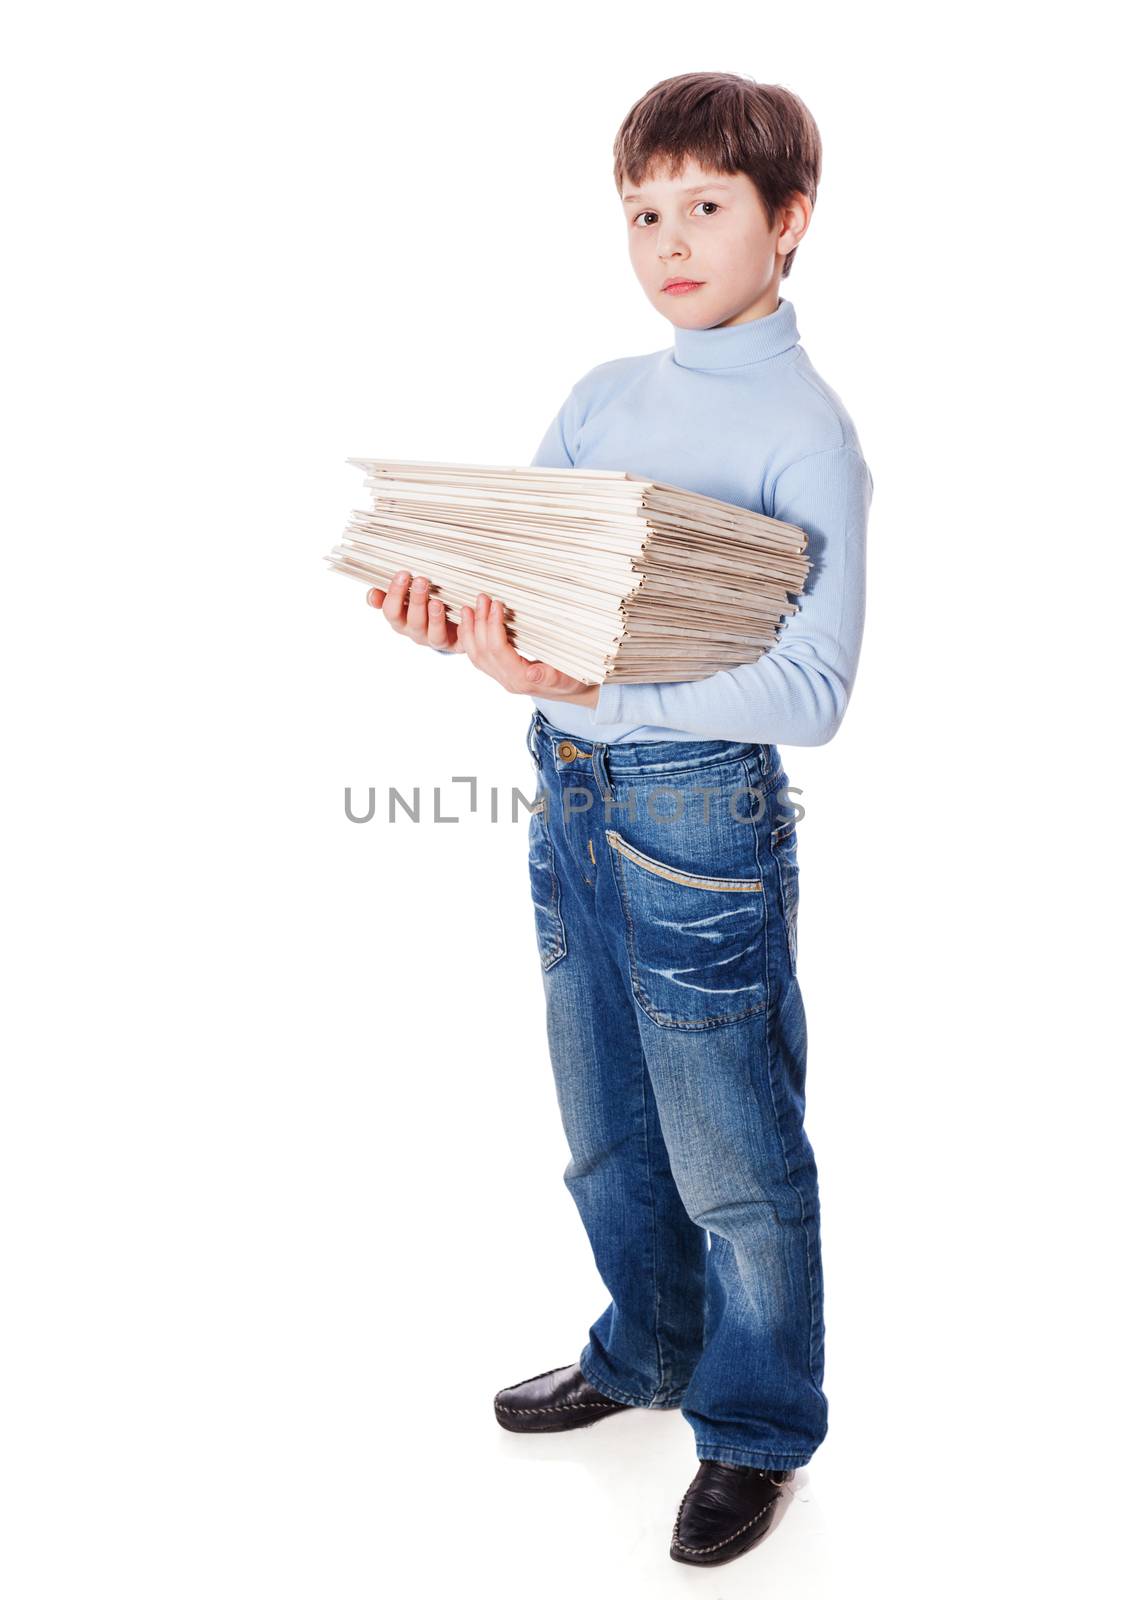 Serious upset schoolboy holding lots of papers isolated on white